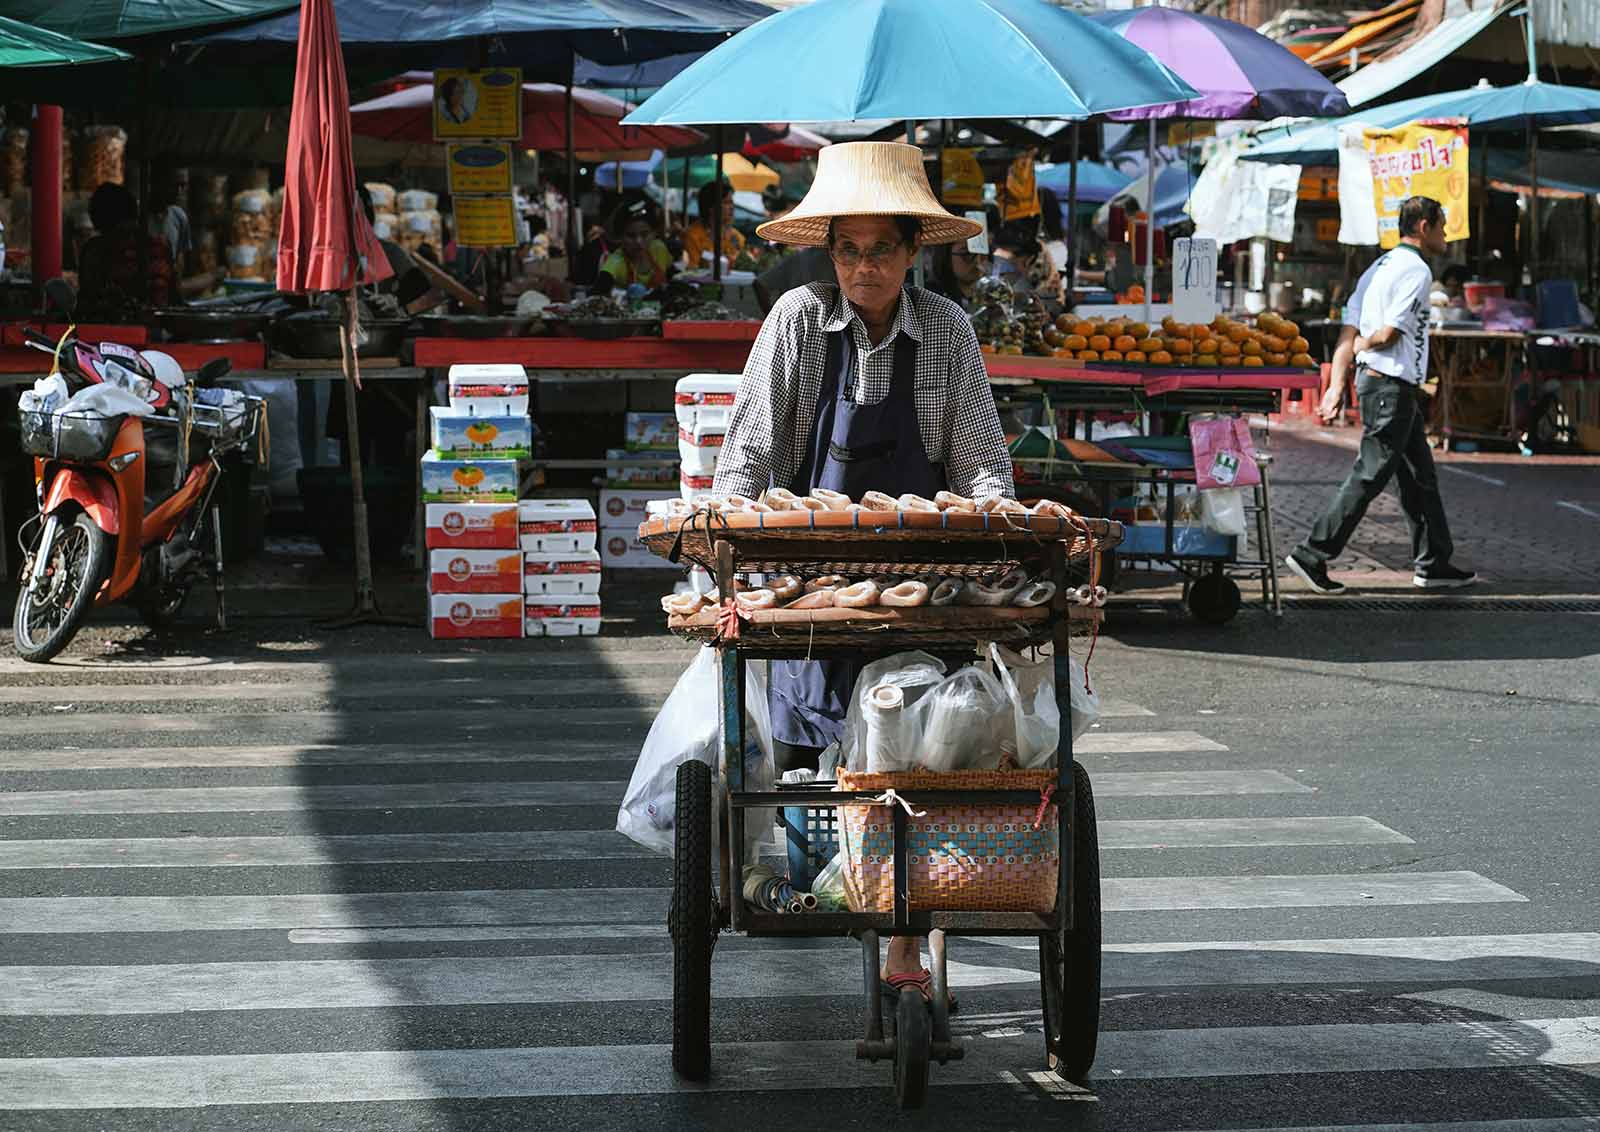 A fishmonger pedalling her food trike in the streets of Bangkok, Thailand